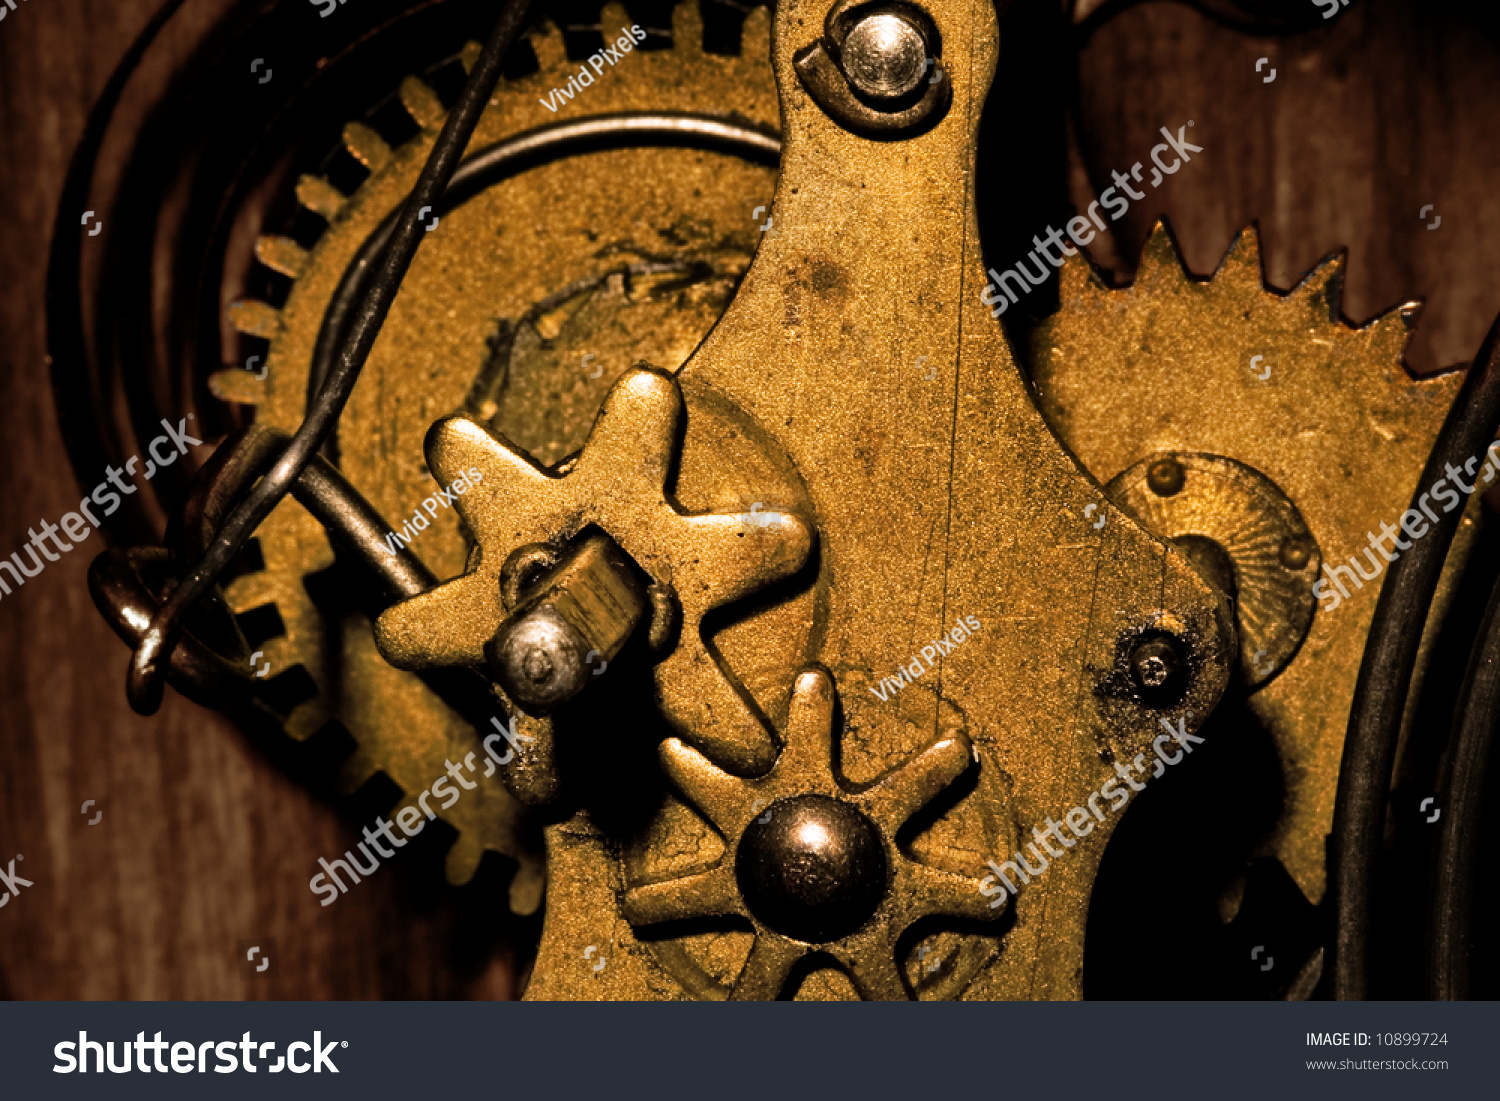 Close-Up Showing The Gears Inside An Old Grandfather Clock ...
